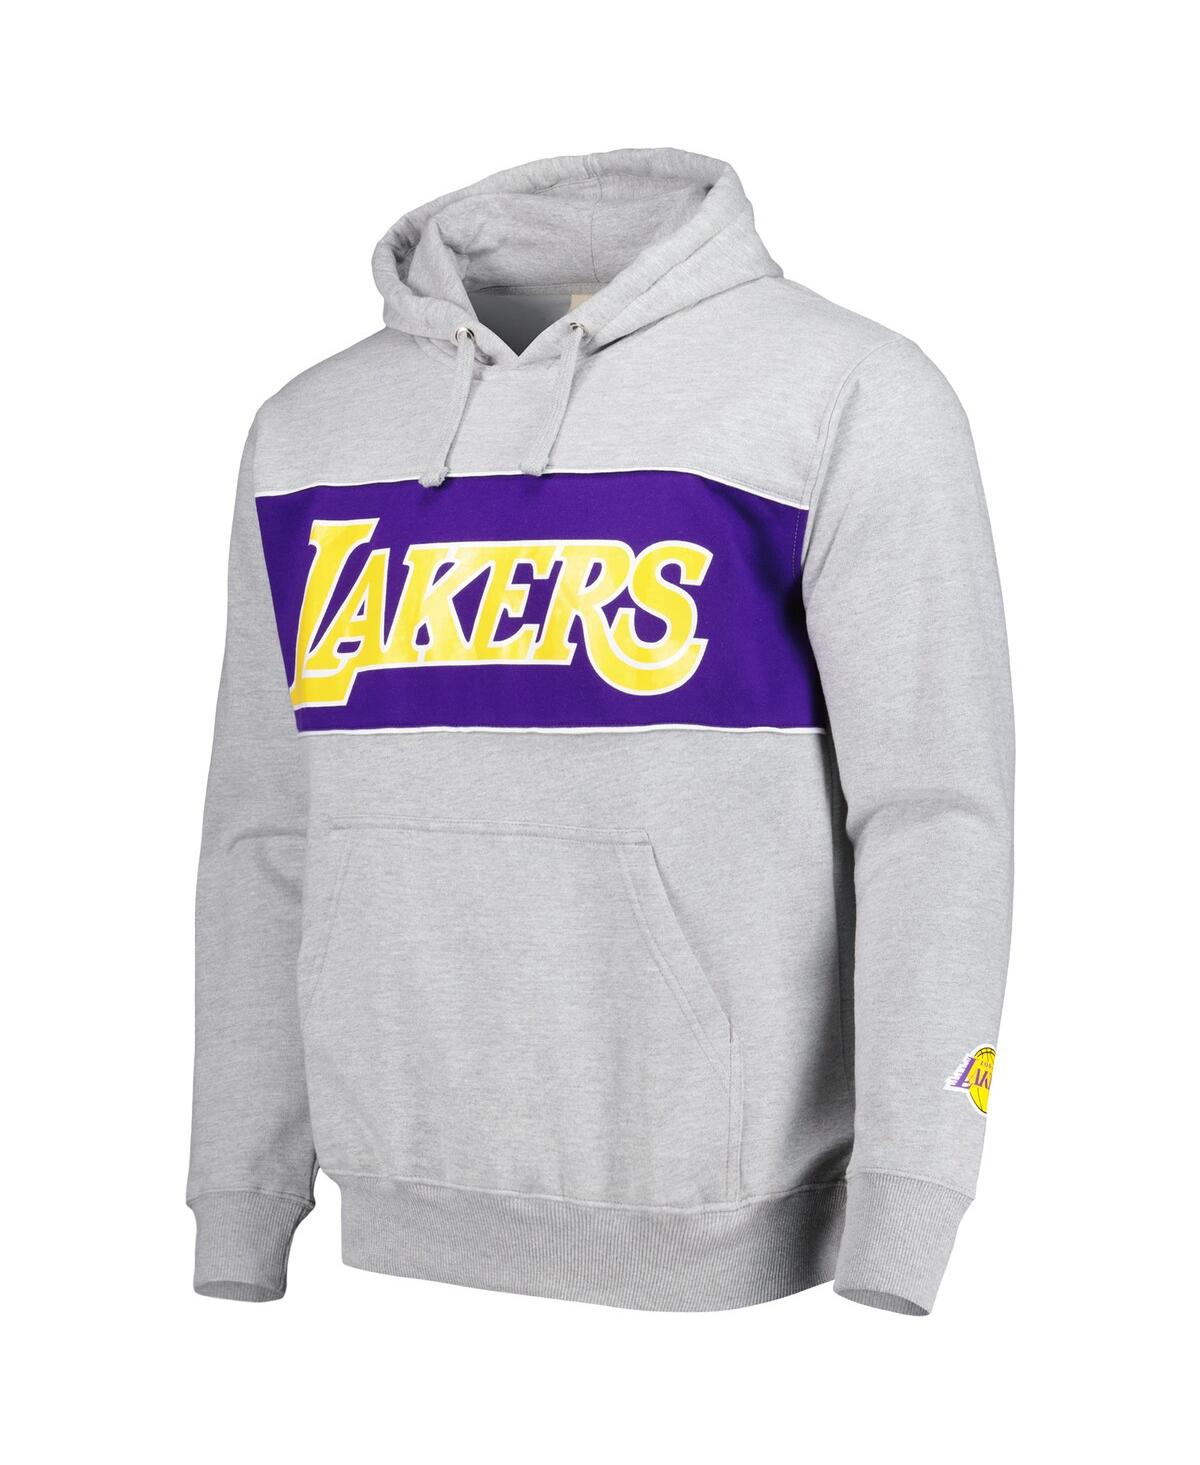 Shop Fanatics Men's  Heather Gray Los Angeles Lakers Wordmark French Terry Pullover Hoodie